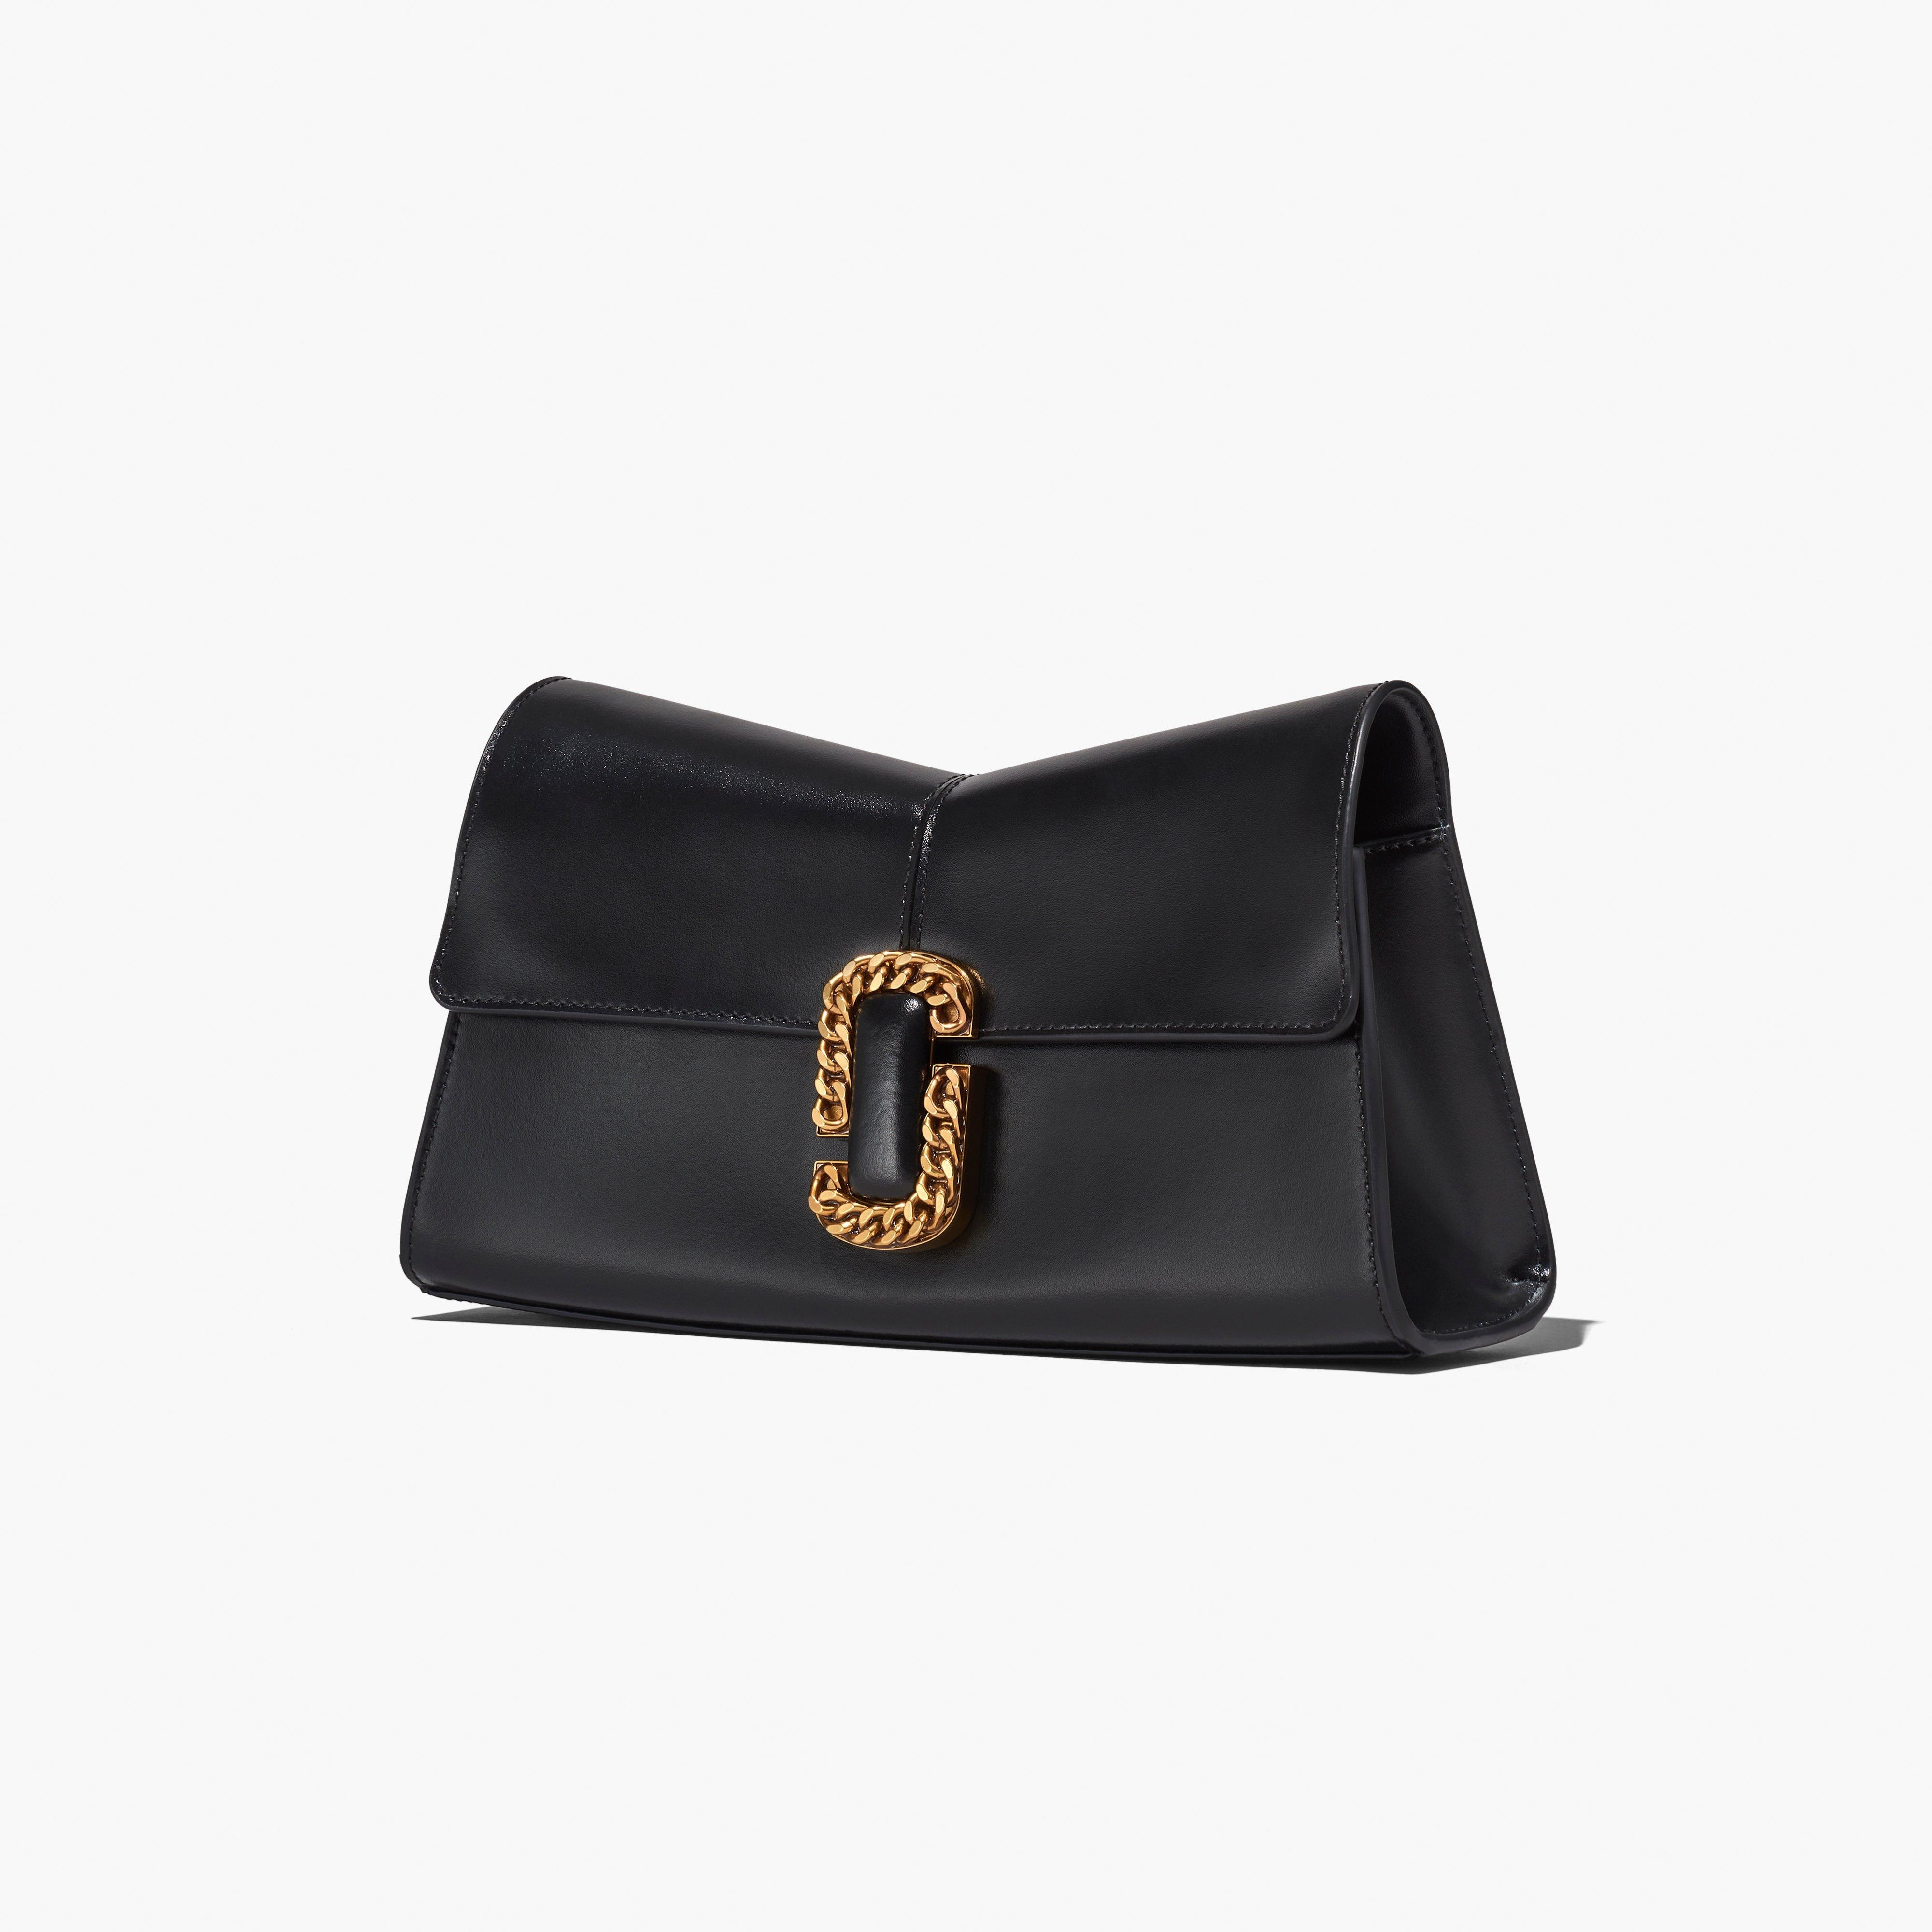 THE ST. MARC CONVERTIBLE CLUTCH - 5